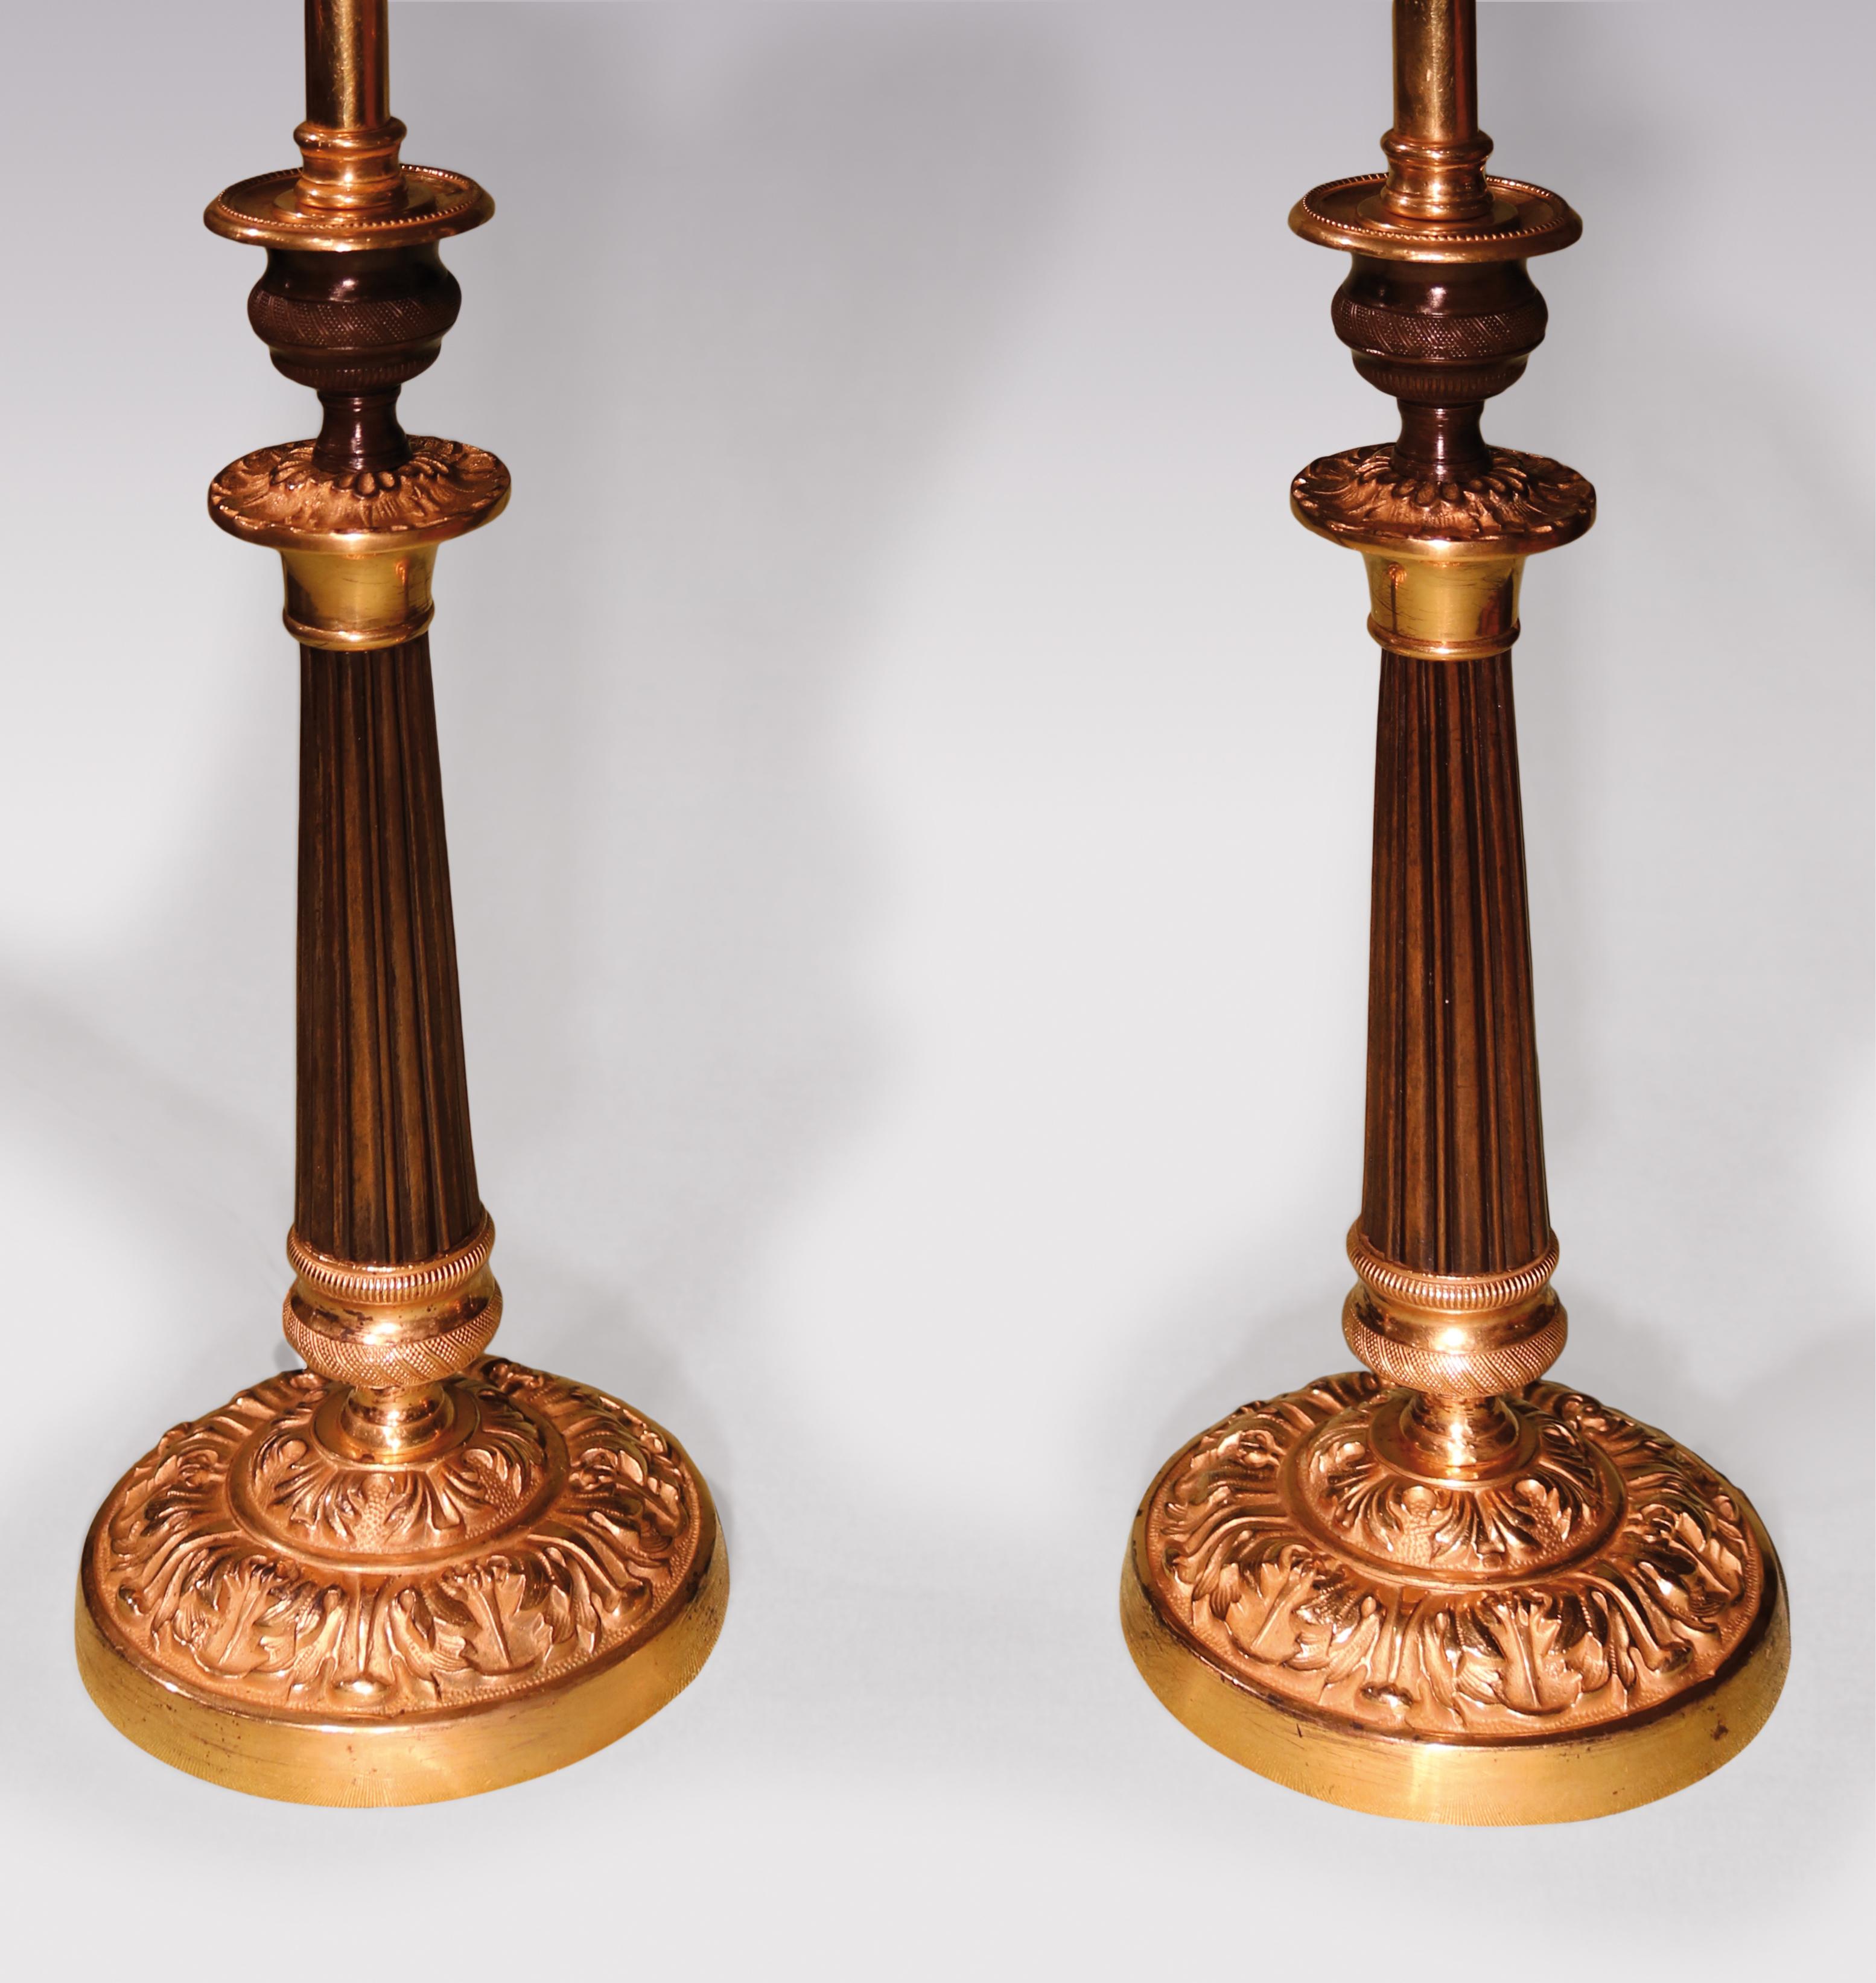 A pair of early 19th century bronze and ormolu candlesticks having engine-turned vase-shaped nozzles above reeded tapering stems ending on acanthus decorated circular bases. (Now converted to lamps) Height with shades: 20.50 